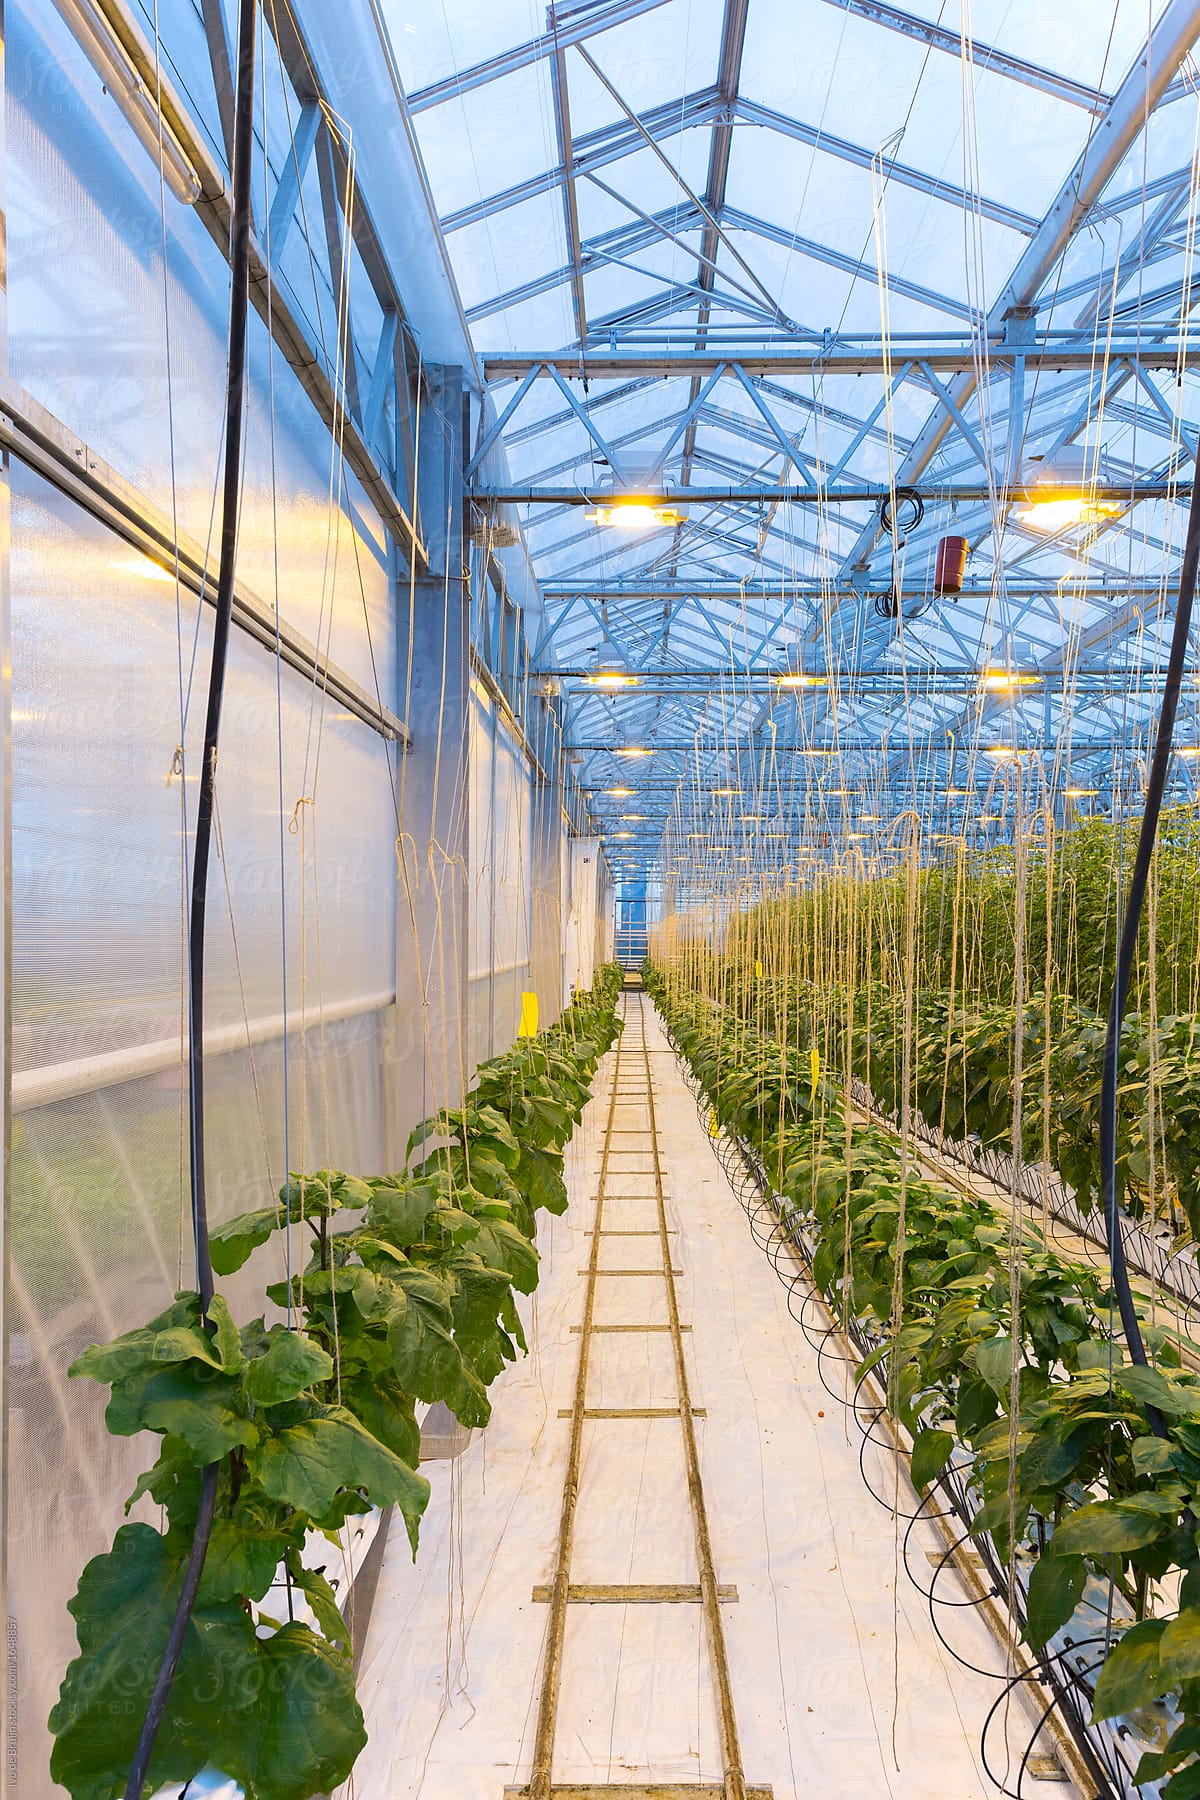 Photo of a modern greenhouse in which vegetable plants are cultivated